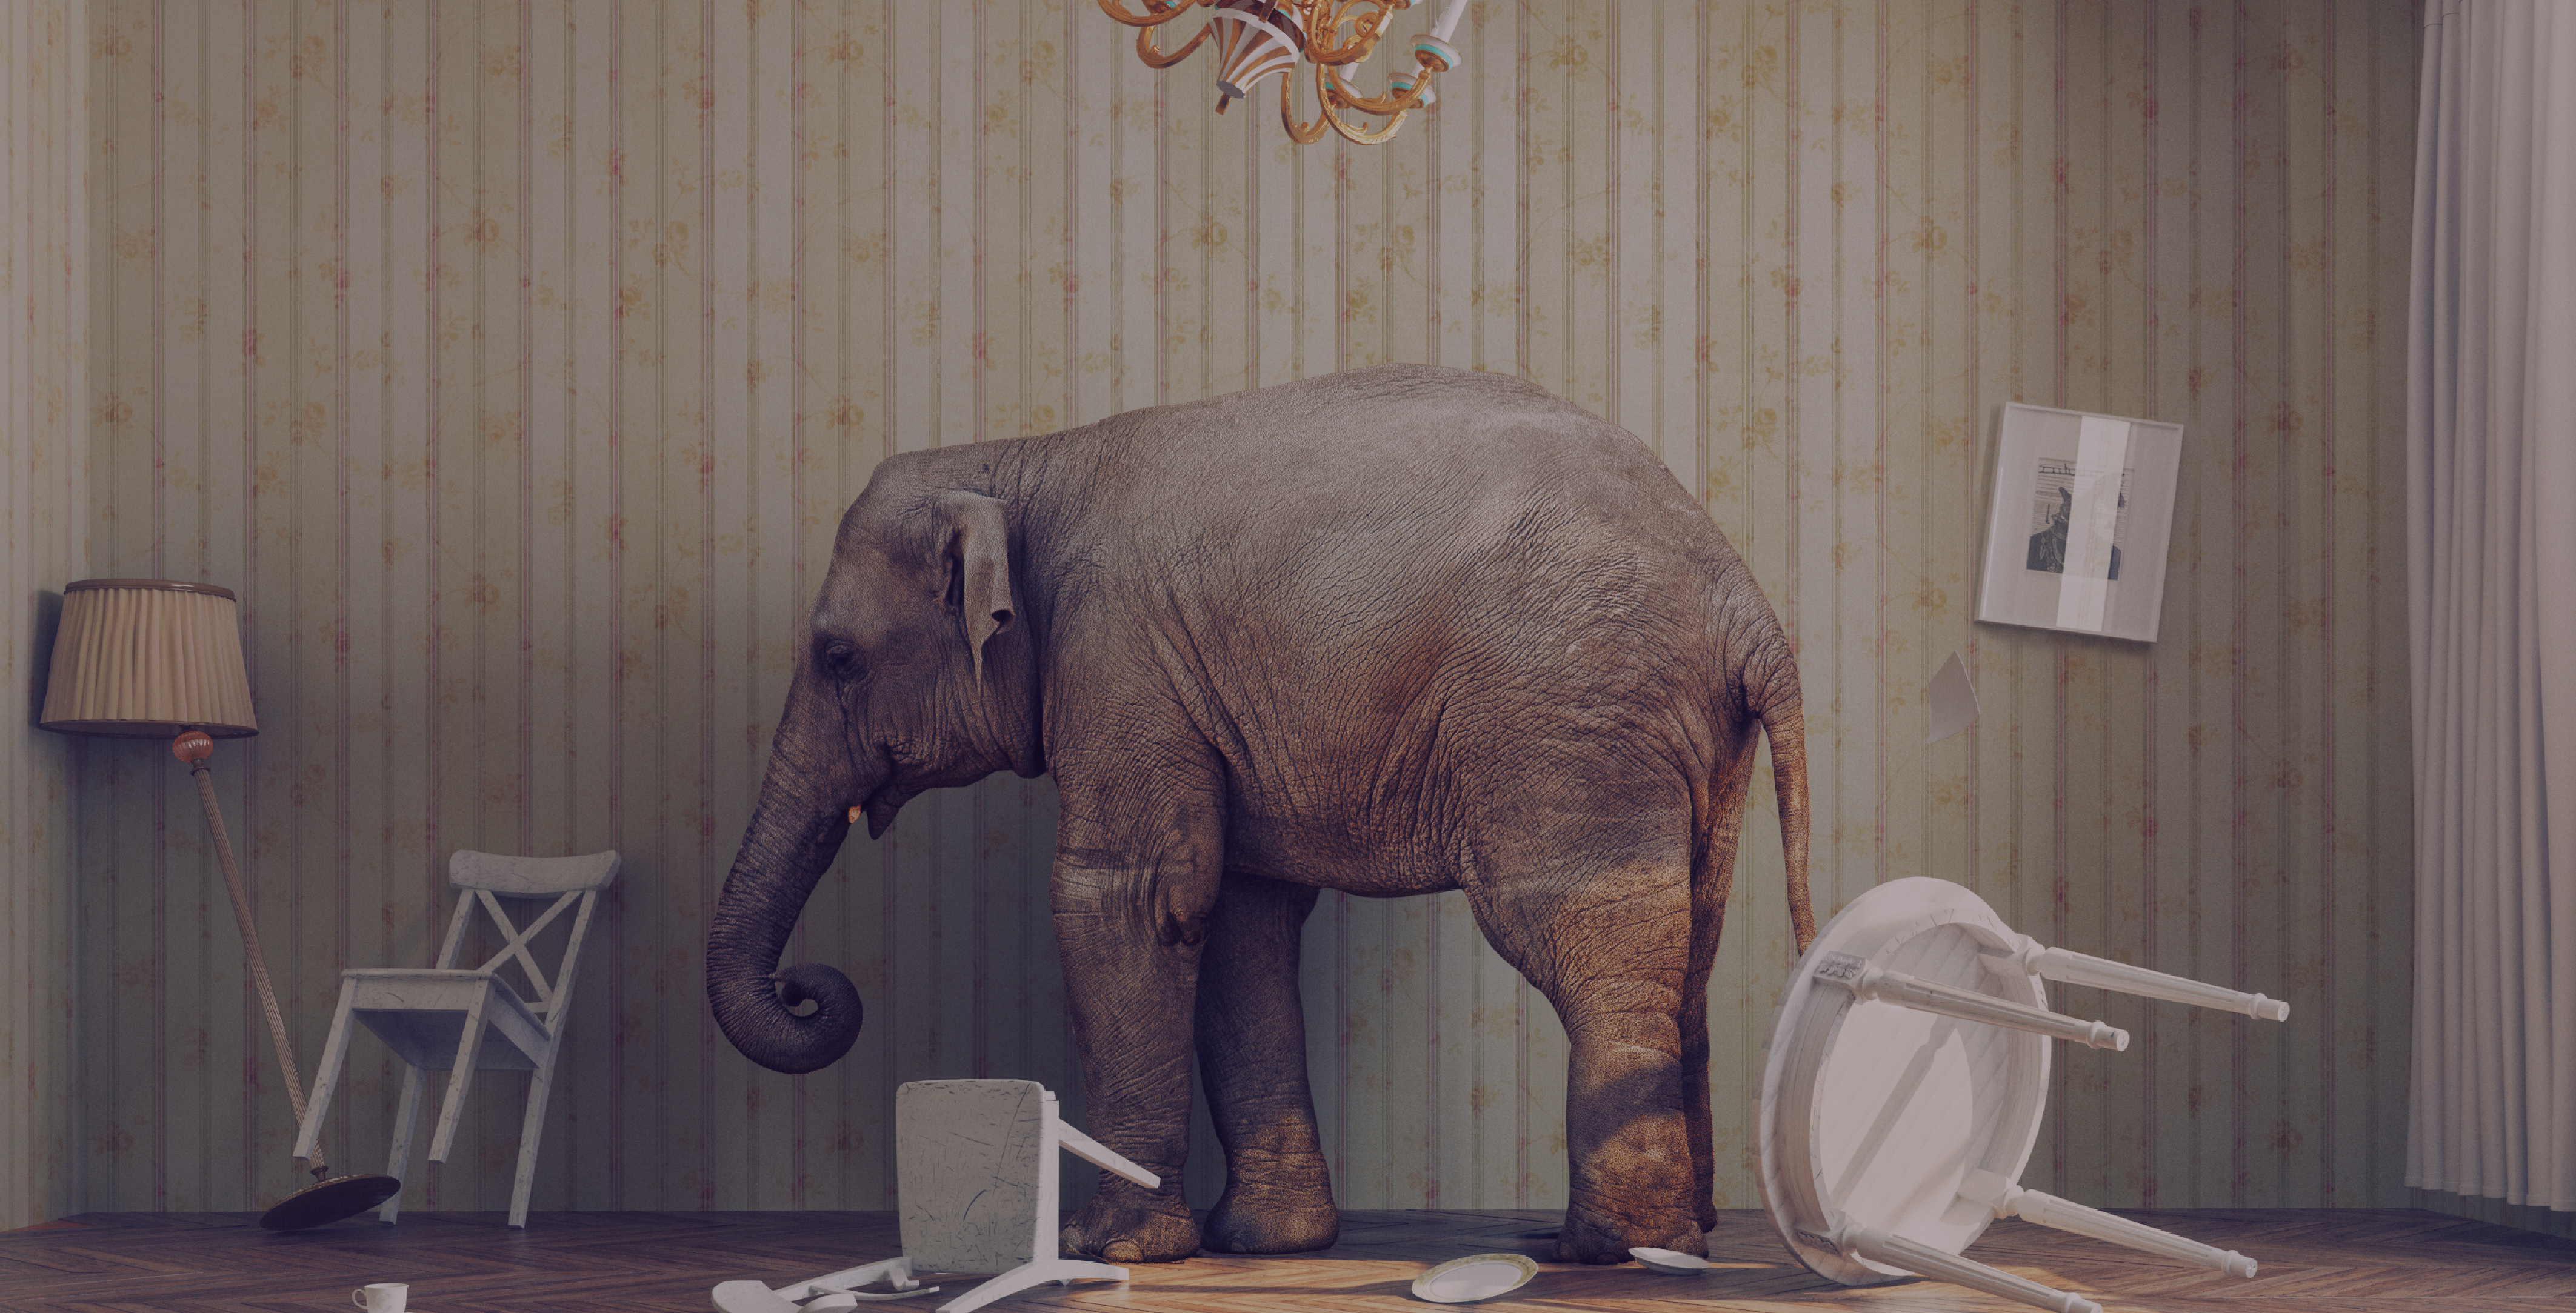 Elephant in a room symbolizing the end of ERP systems, highlighting the shift in modern digital landscapes.